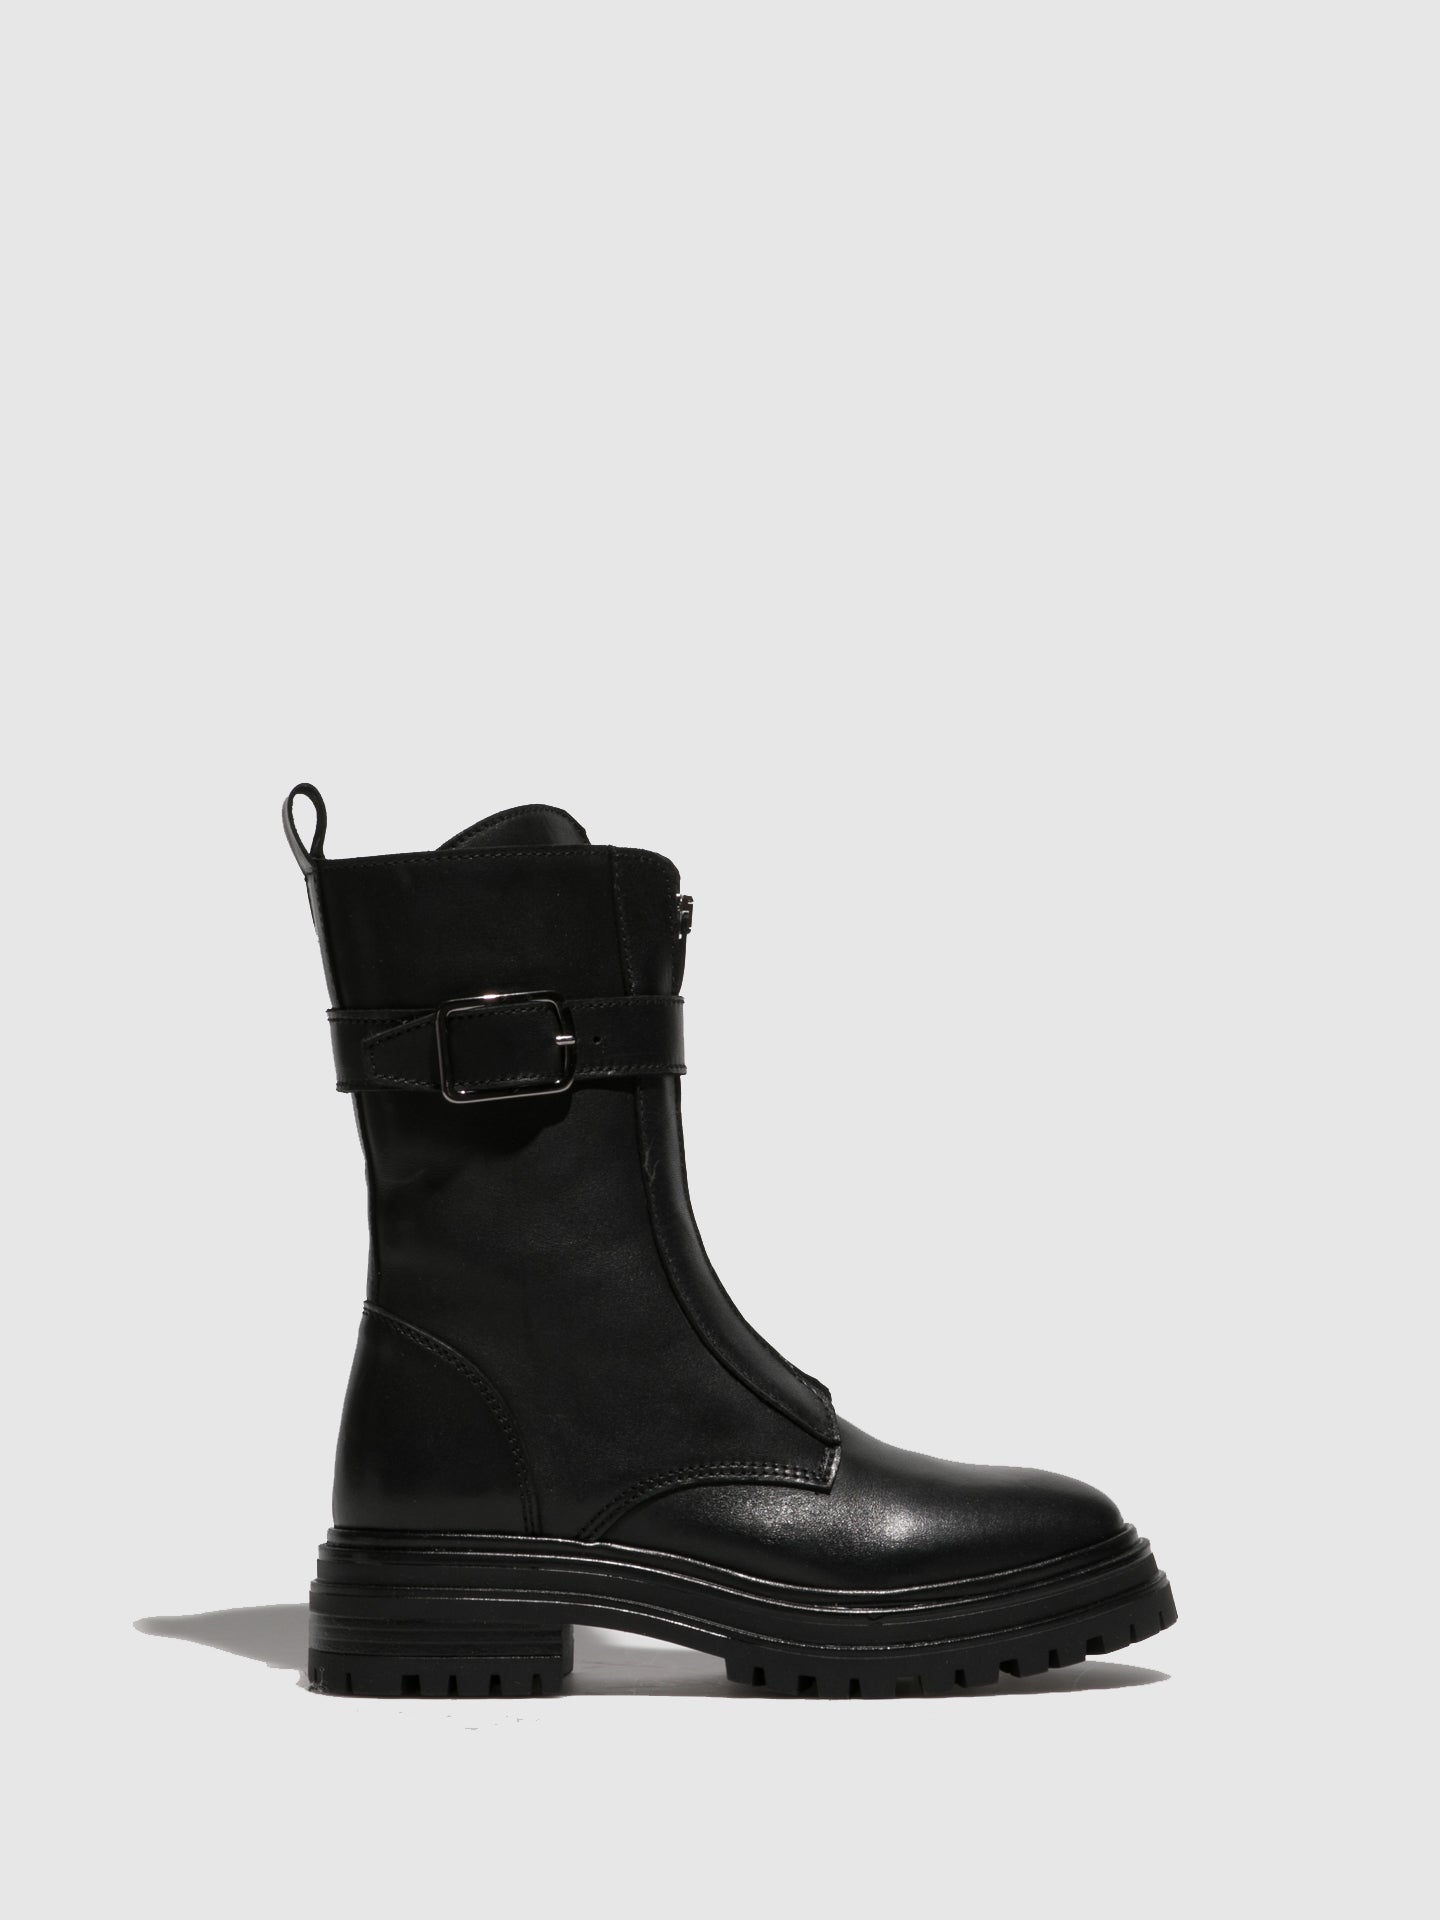 Foreva Black Zip Up Boots